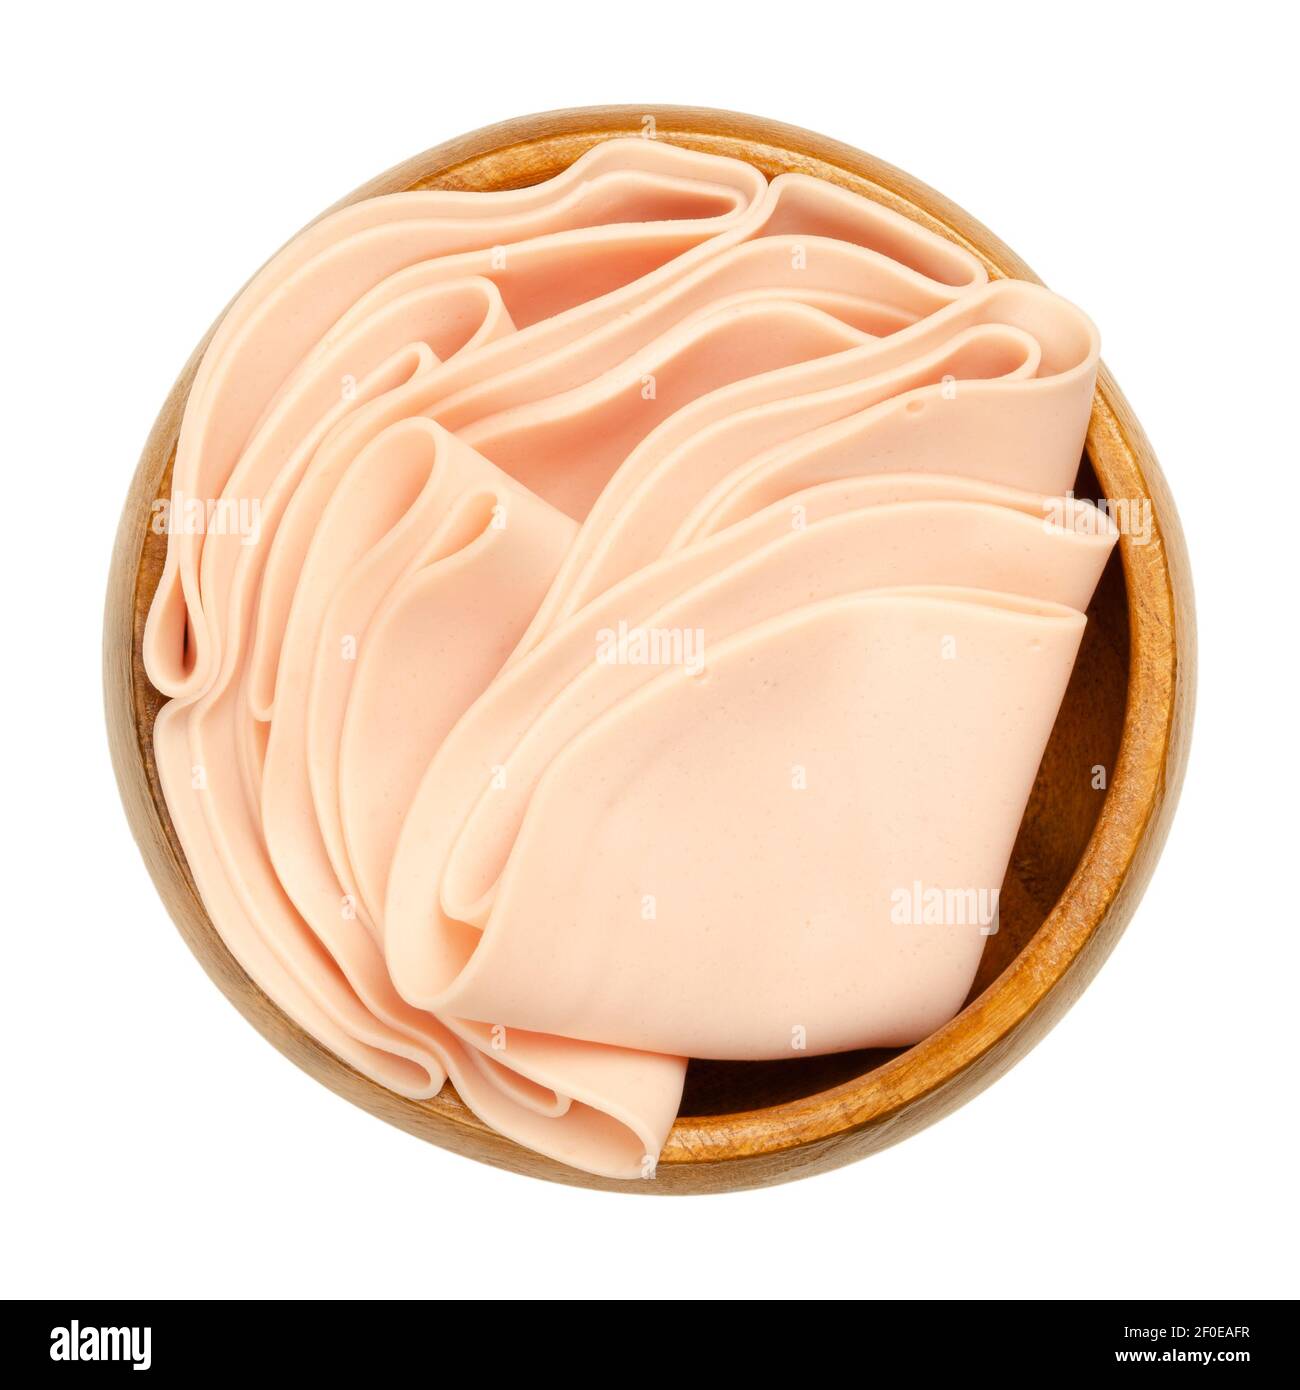 Vegetarian sausage, cold cut, in a wooden bowl. Thin slices of meatless Extrawurst, similar to Lyoner or Bologna sausage. Stock Photo